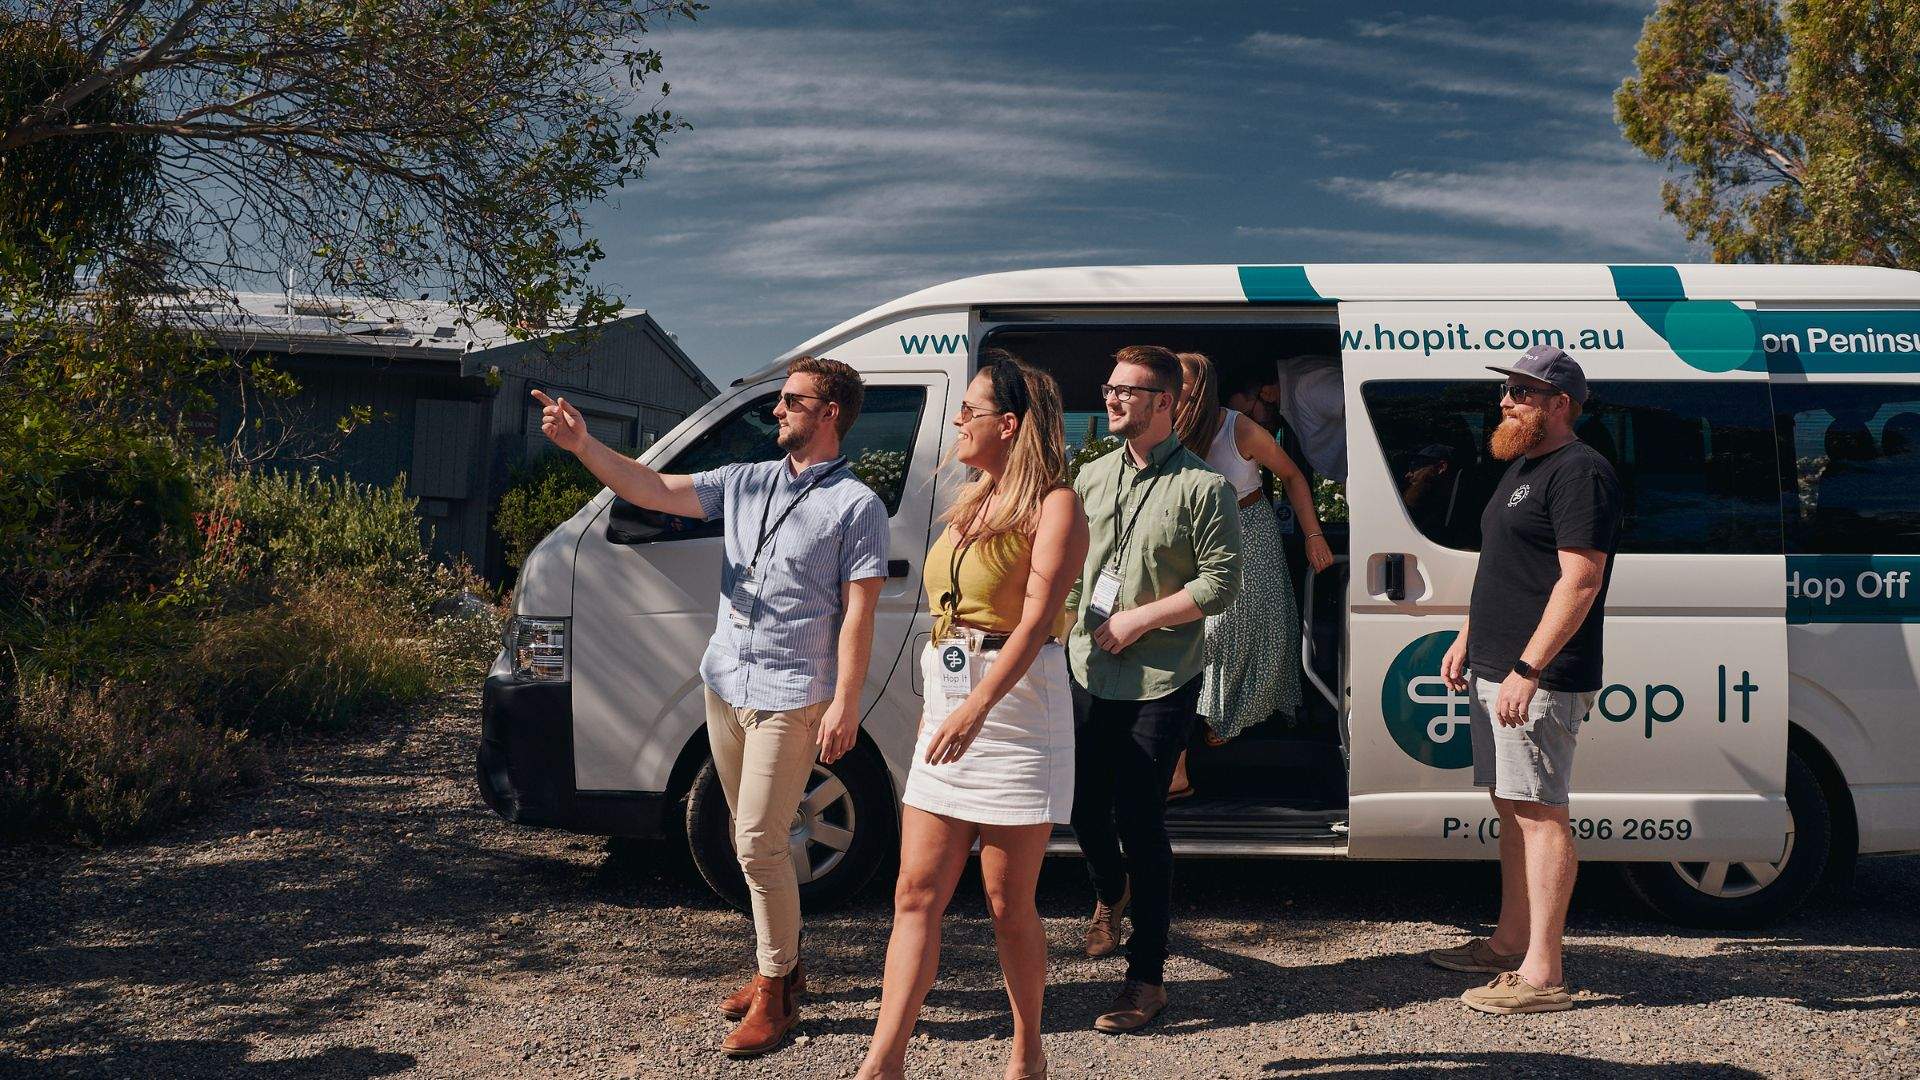 The Bellarine Peninsula's New Hop-On-Hop-Off Bus Lets You Choose Your Own Winery-Hopping Adventure